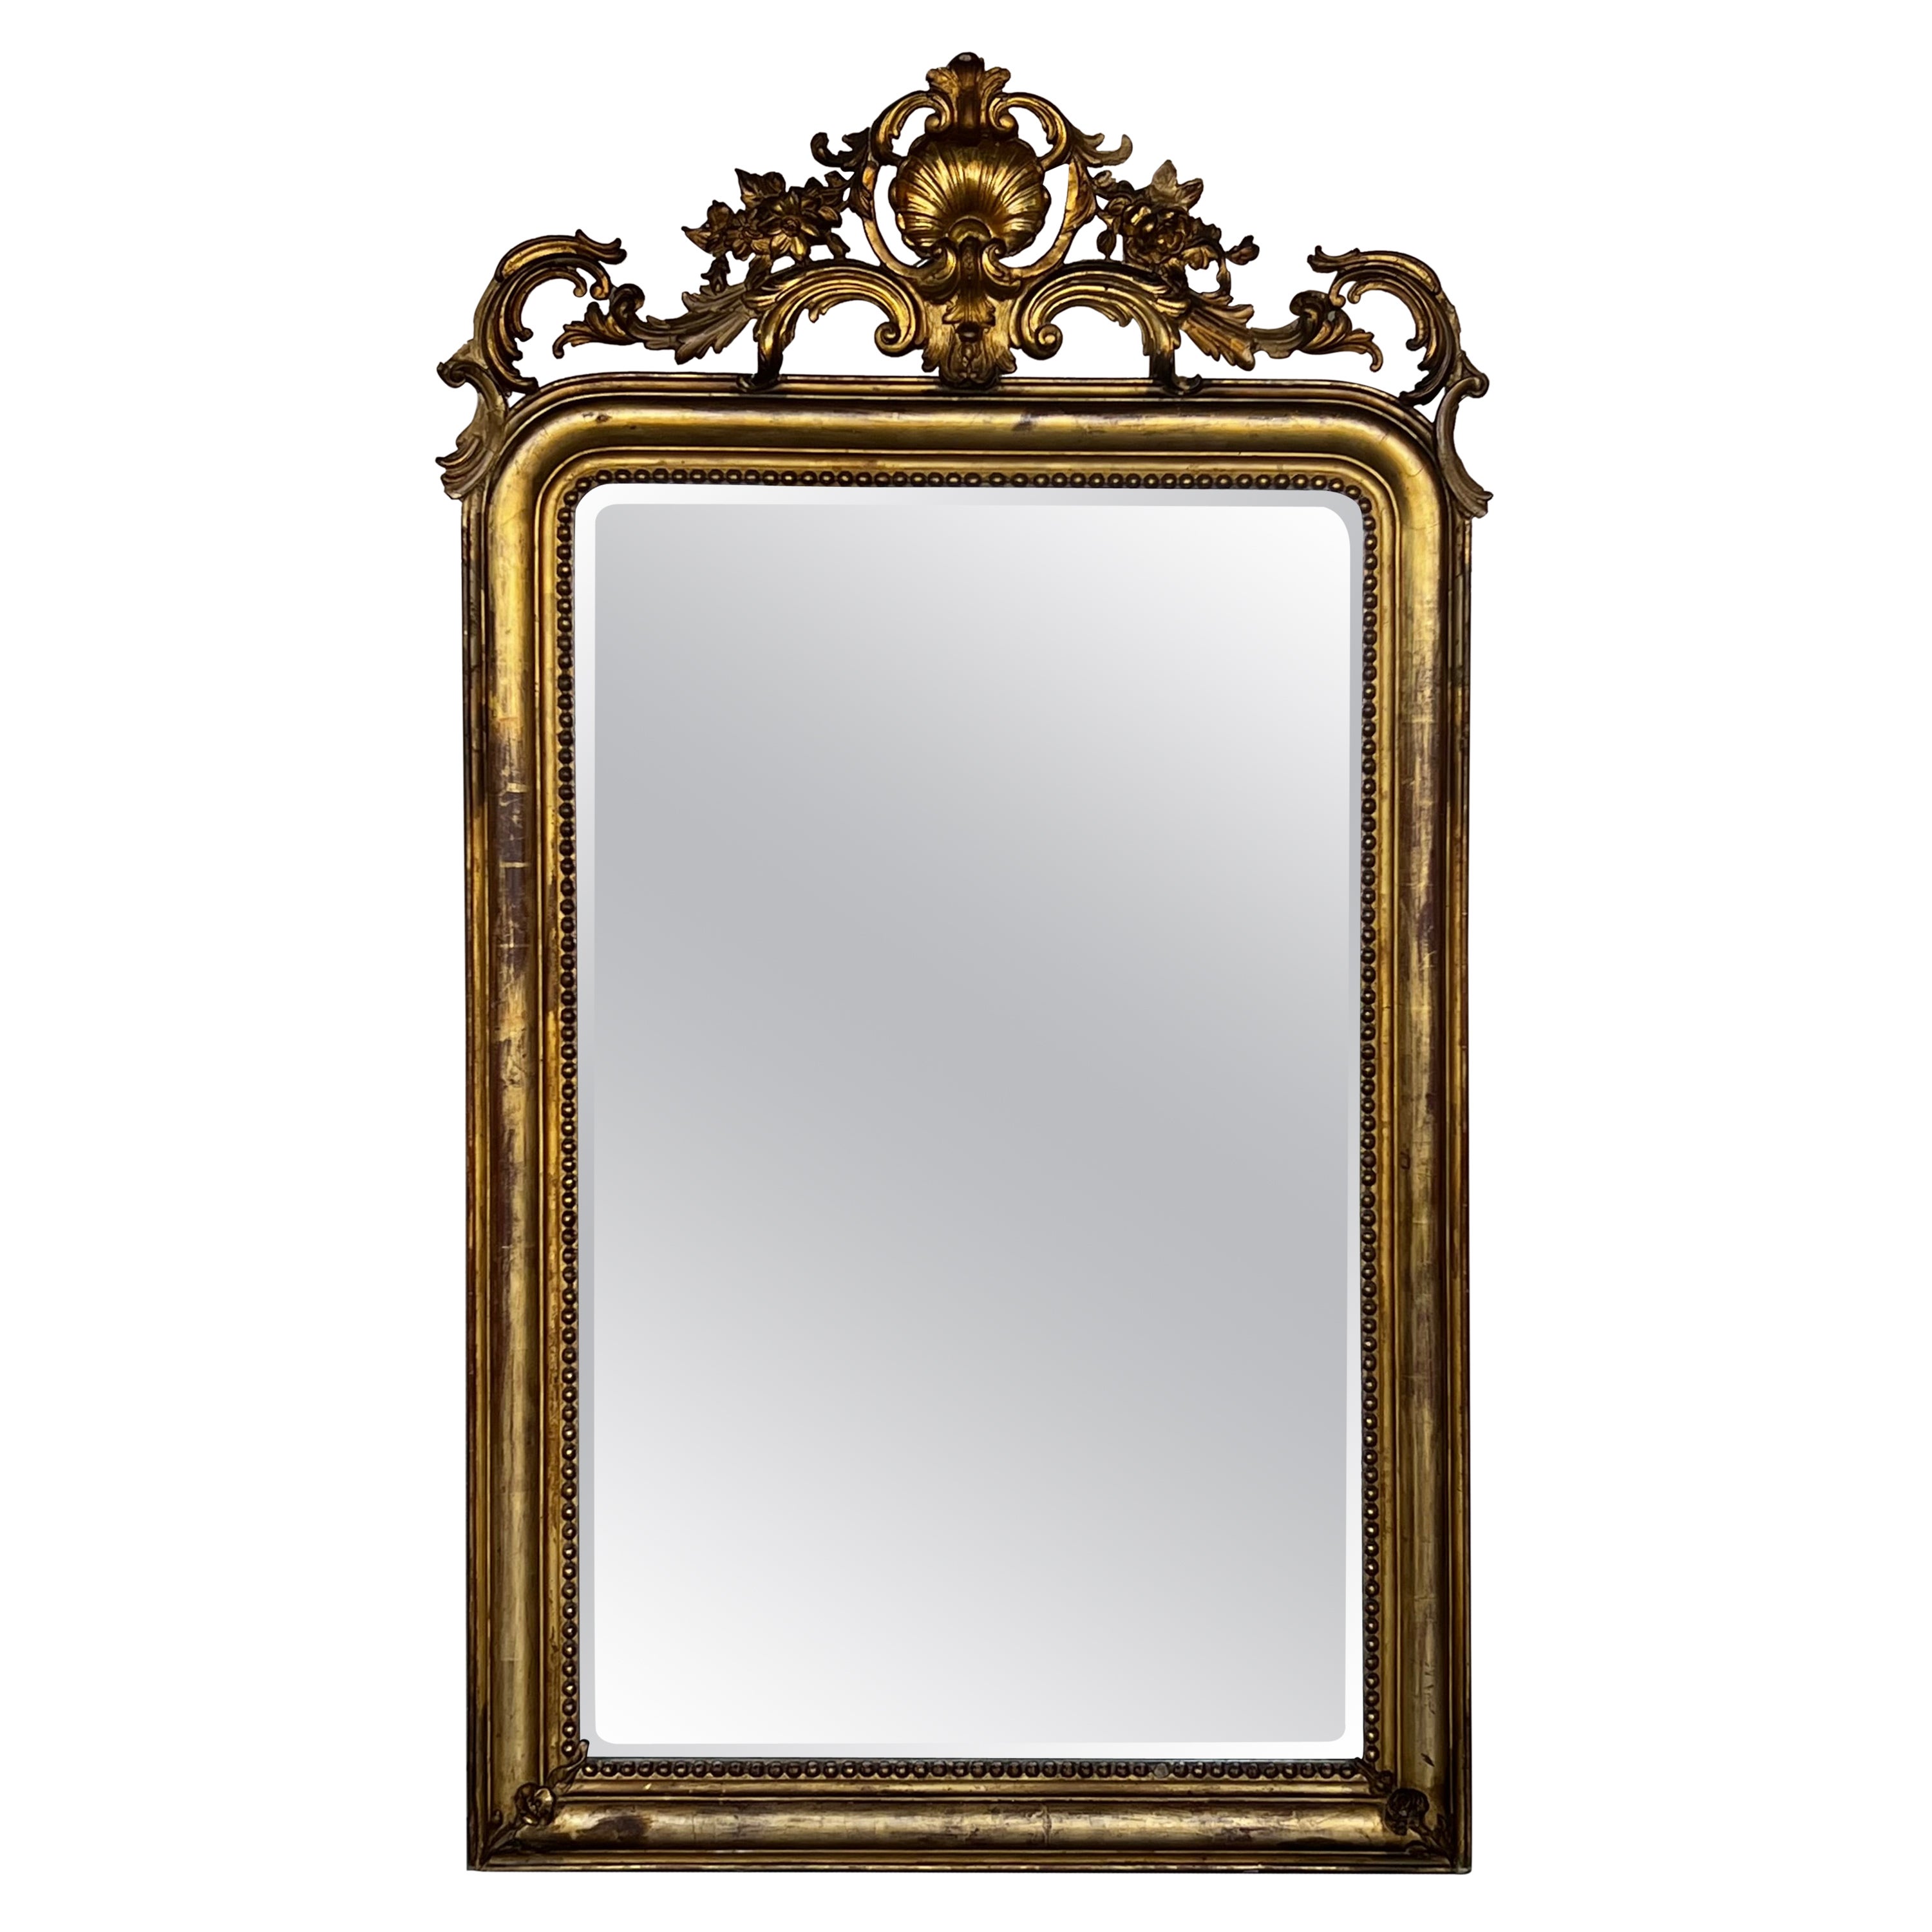 19th Century French Empire Period Carved Giltwood Rectangular Mirror with Crest For Sale